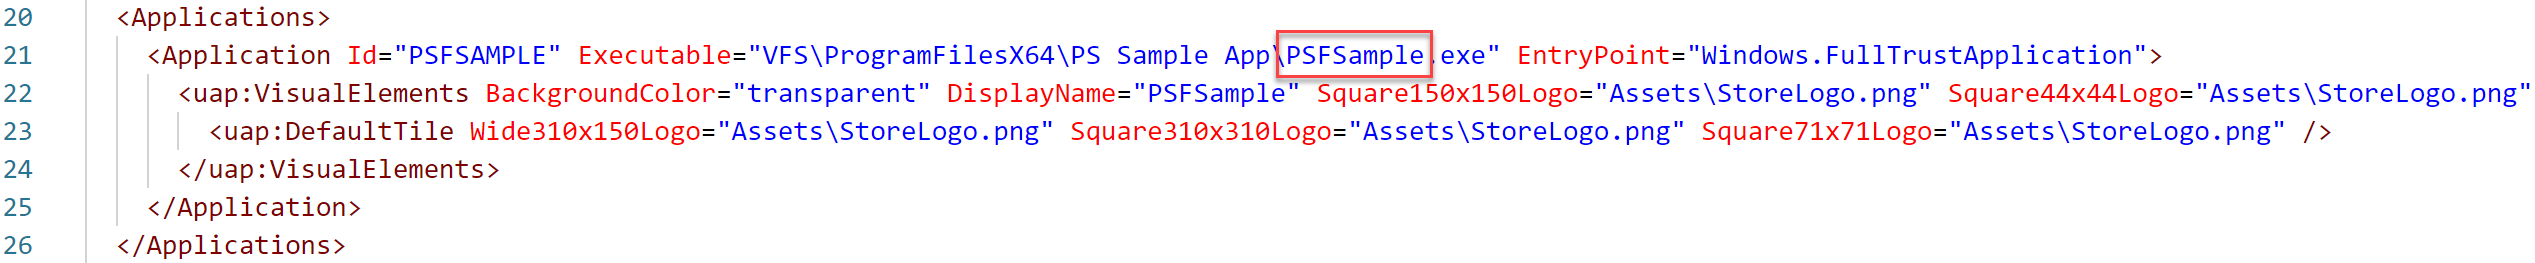 Image circling the location of the process executable within the AppxManifest file.